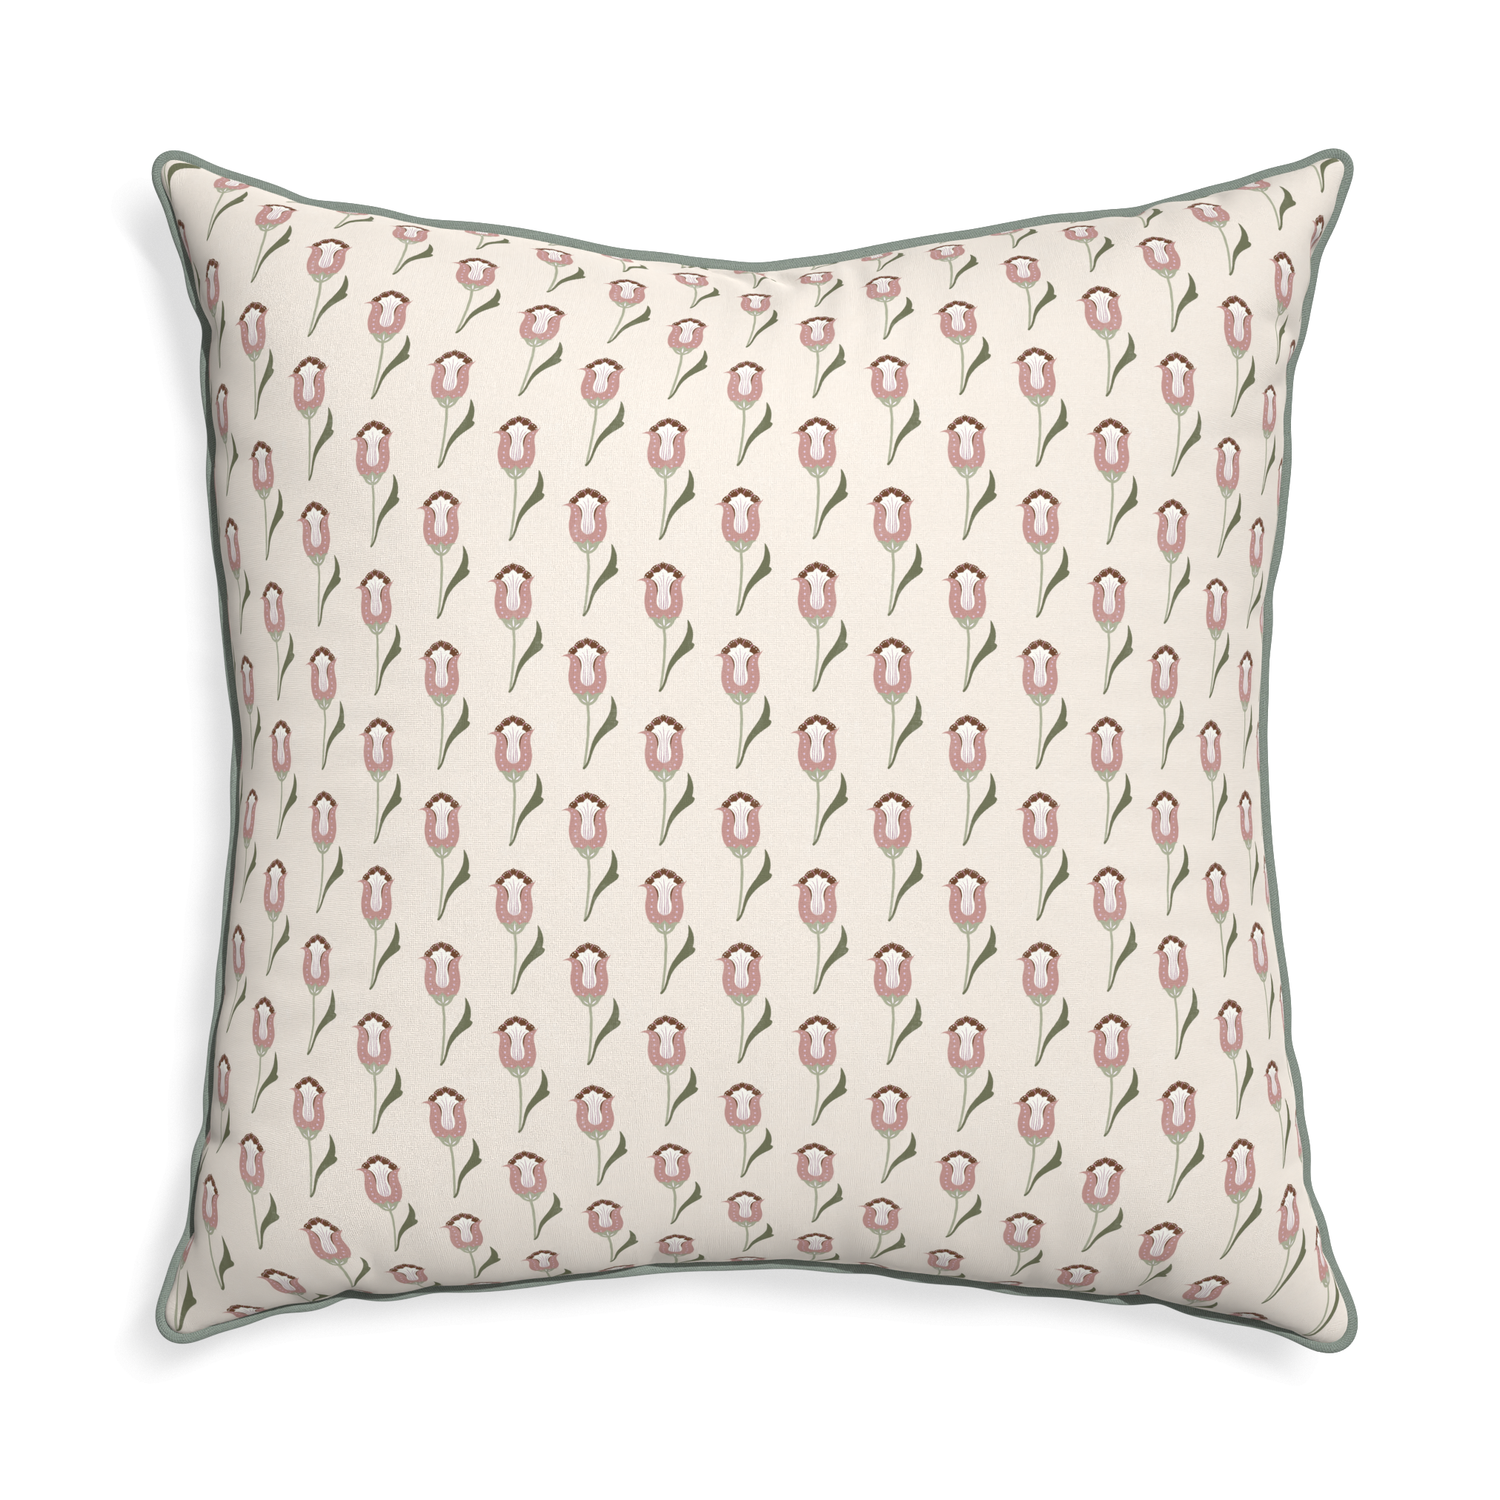 Euro-sham annabelle orchid custom pink tulippillow with sage piping on white background